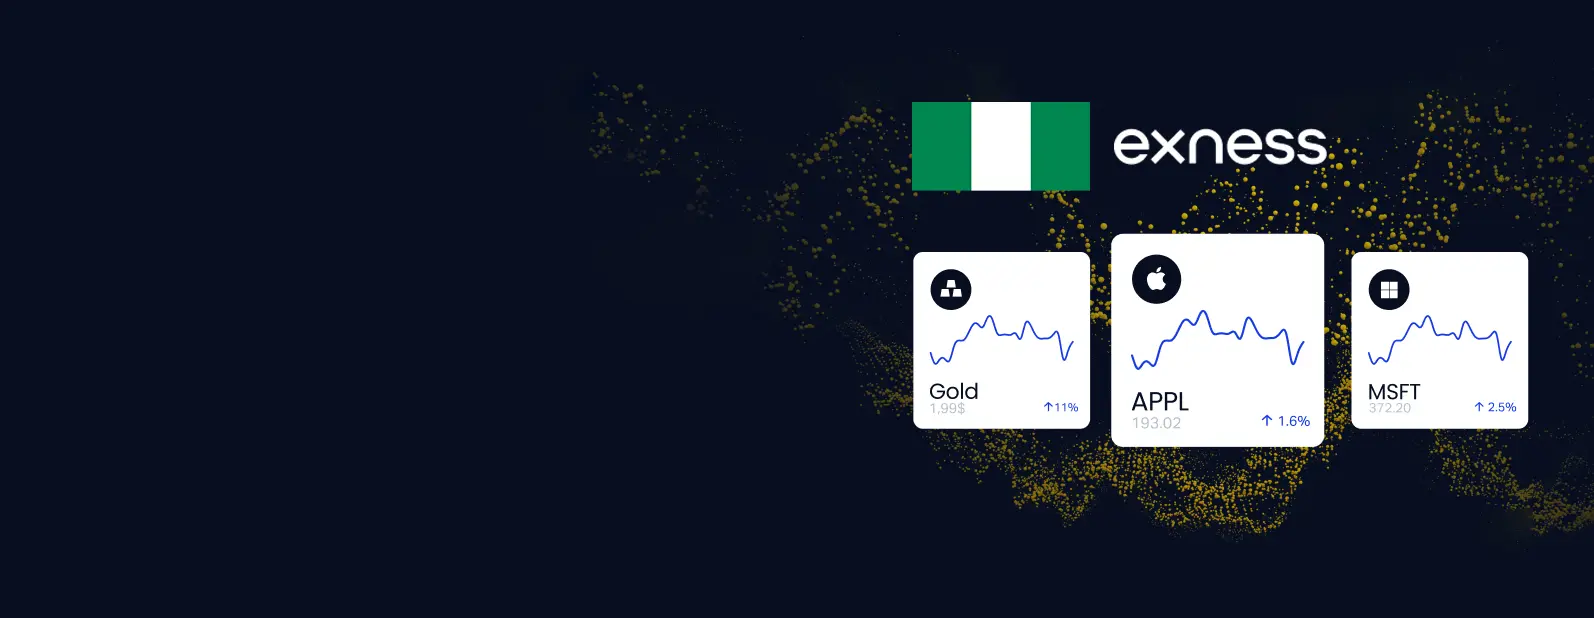 Exness online broker - Forex and Online Trading in Nigeria.